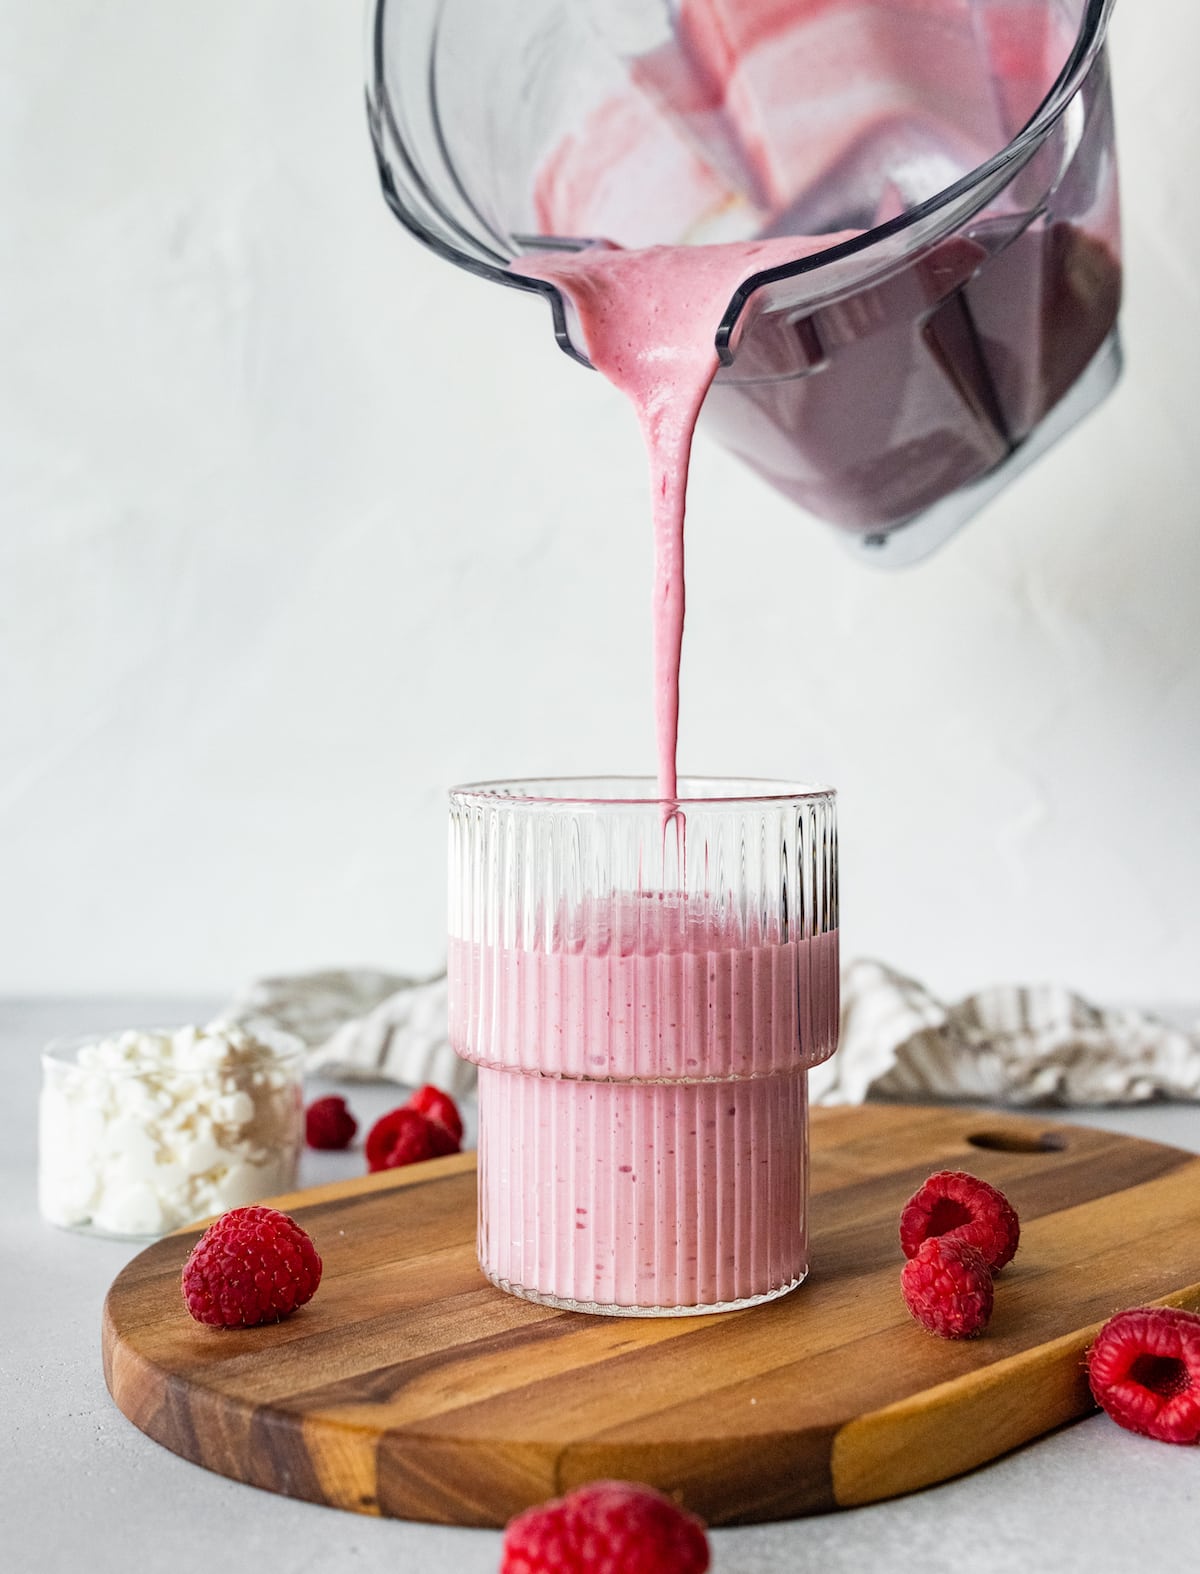 A cottage cheese smoothie being poured into a glass from the blender. Glass is sitting on a wooden cutting board with fresh raspberries scattered around.